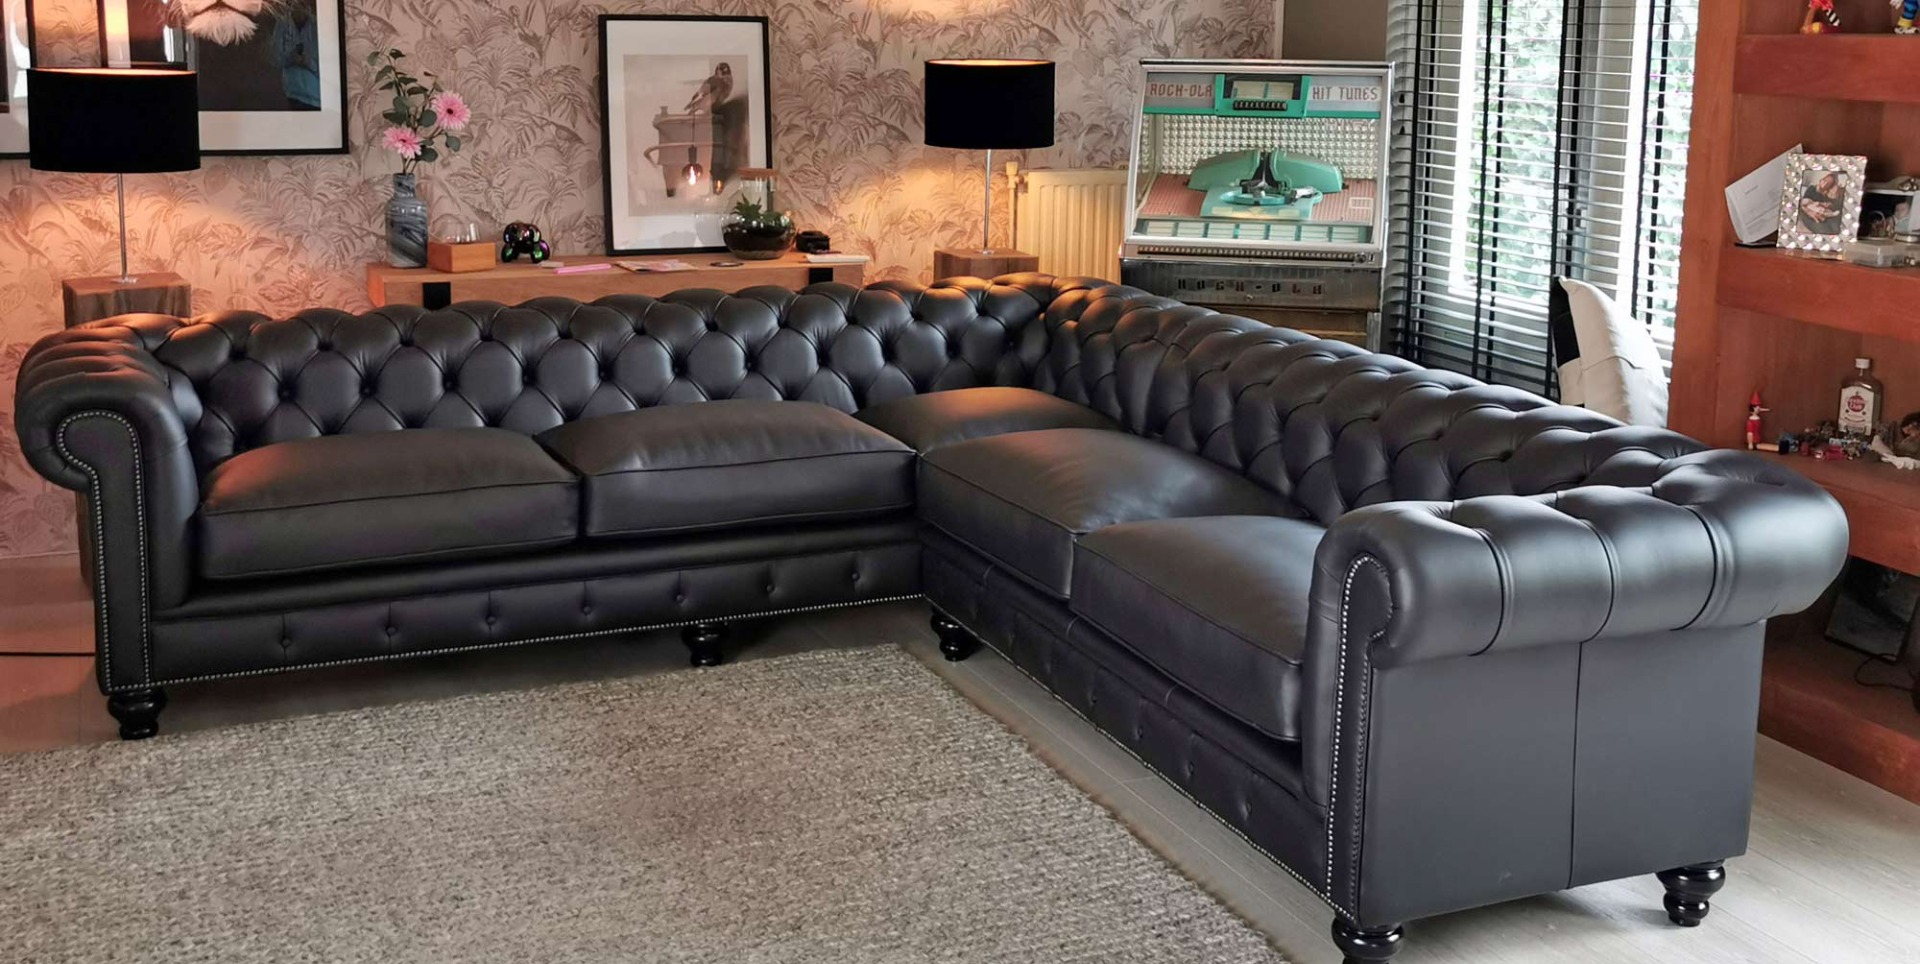 Whitehall Chesterfield Ecksofa, MADE IN ENGLAND